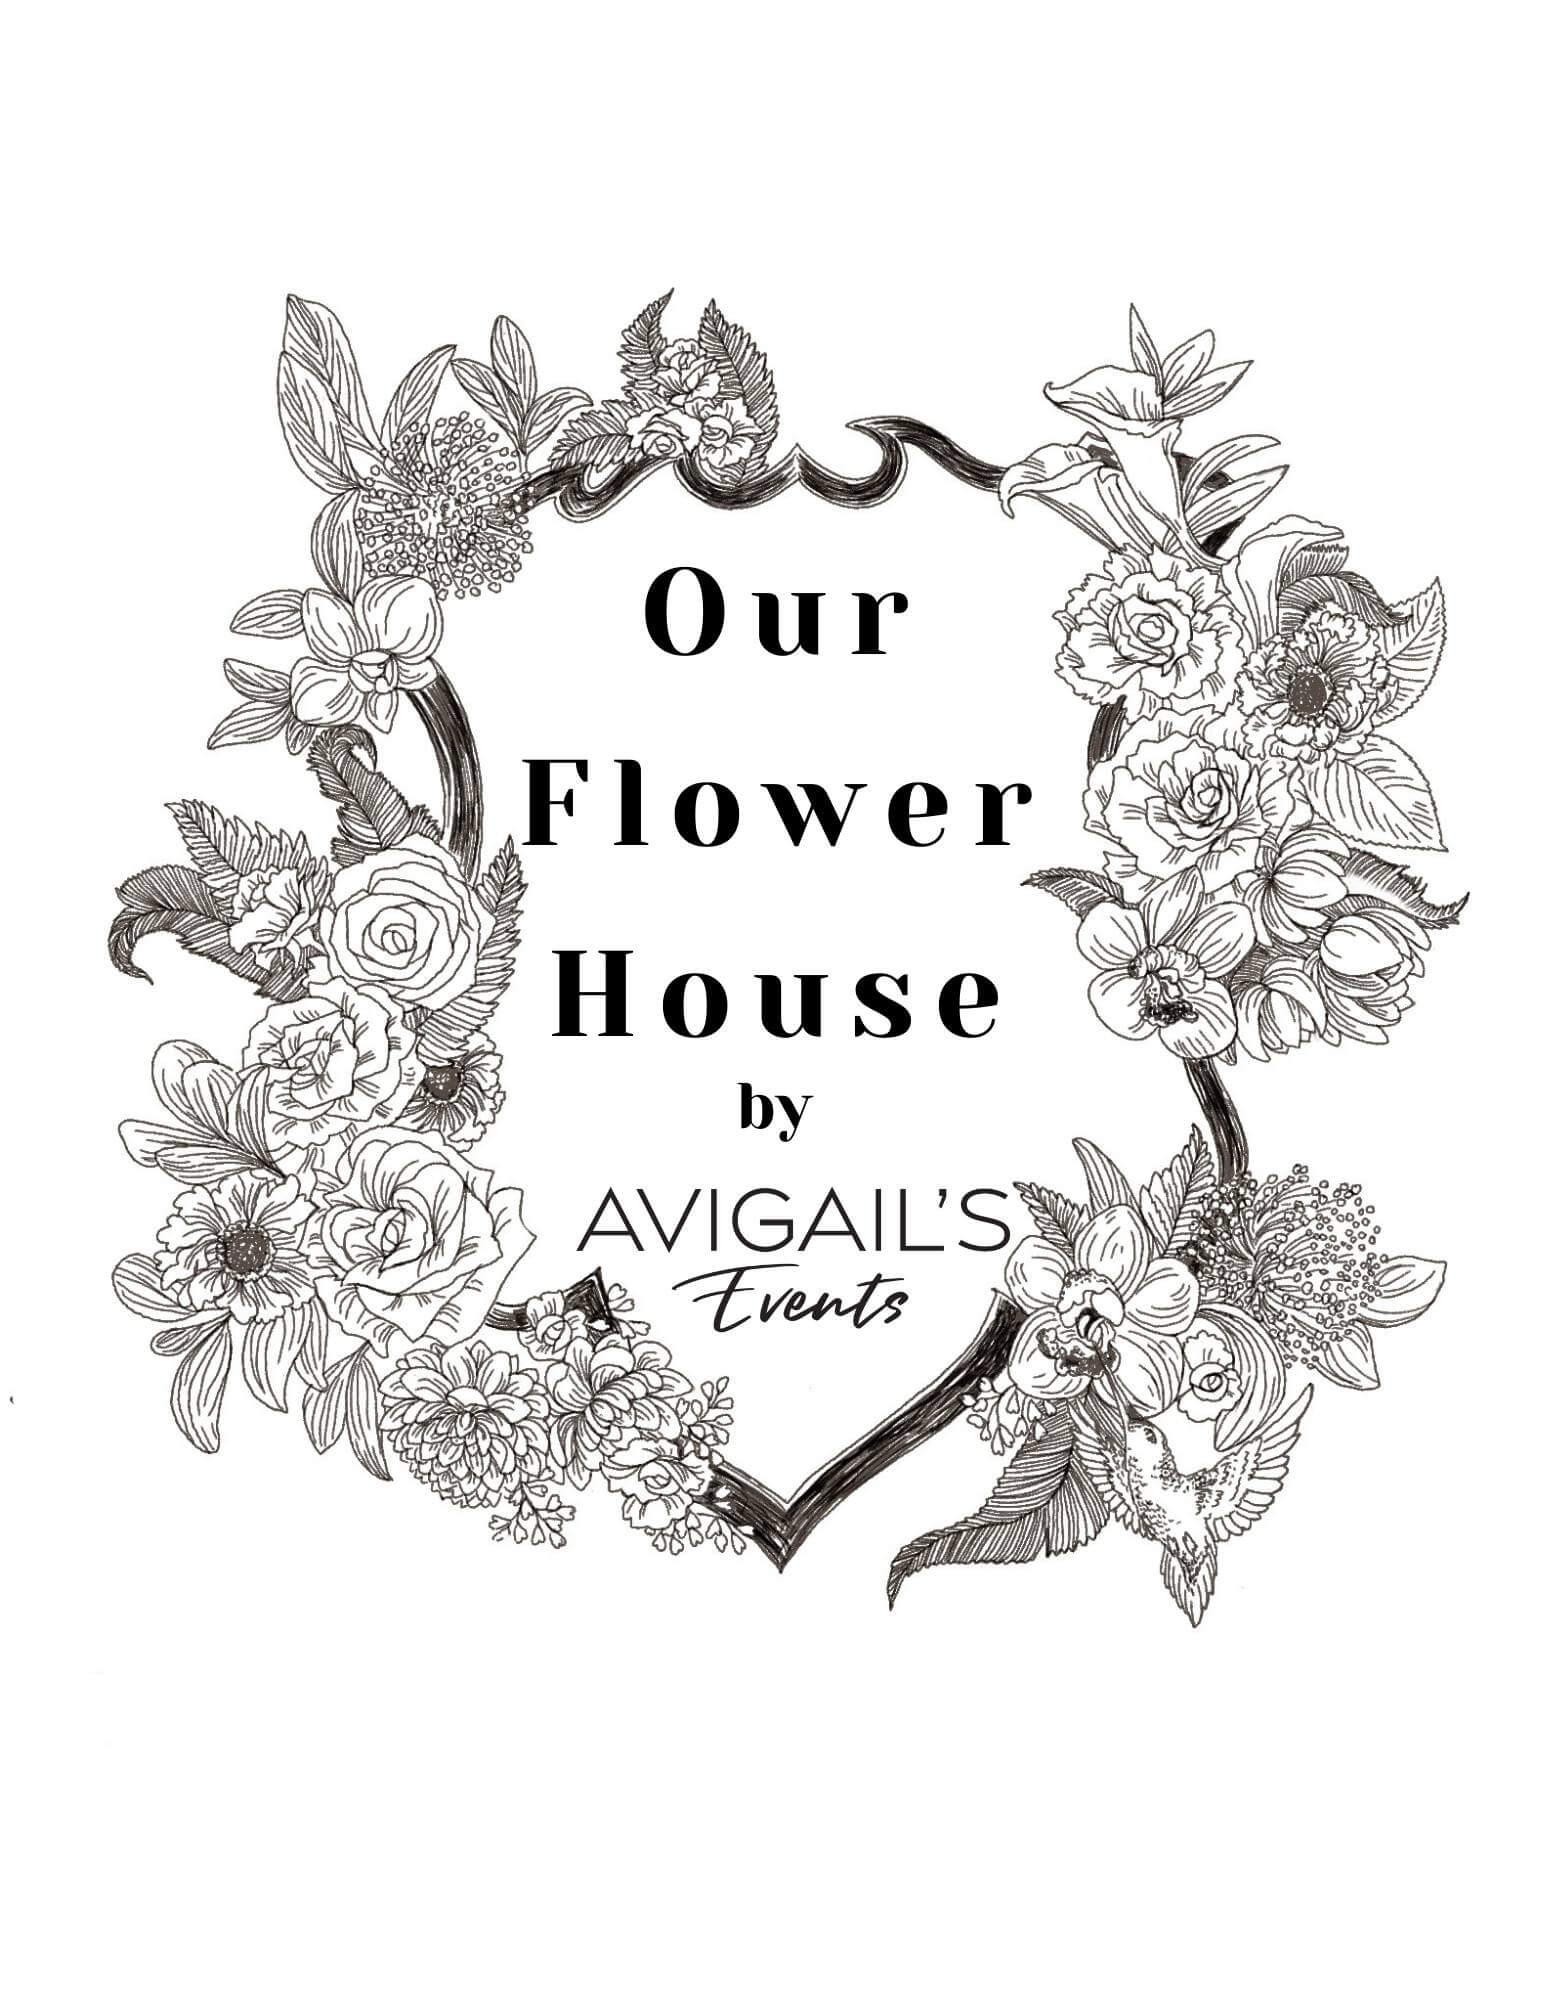 Our Flower House / Avigail's Events